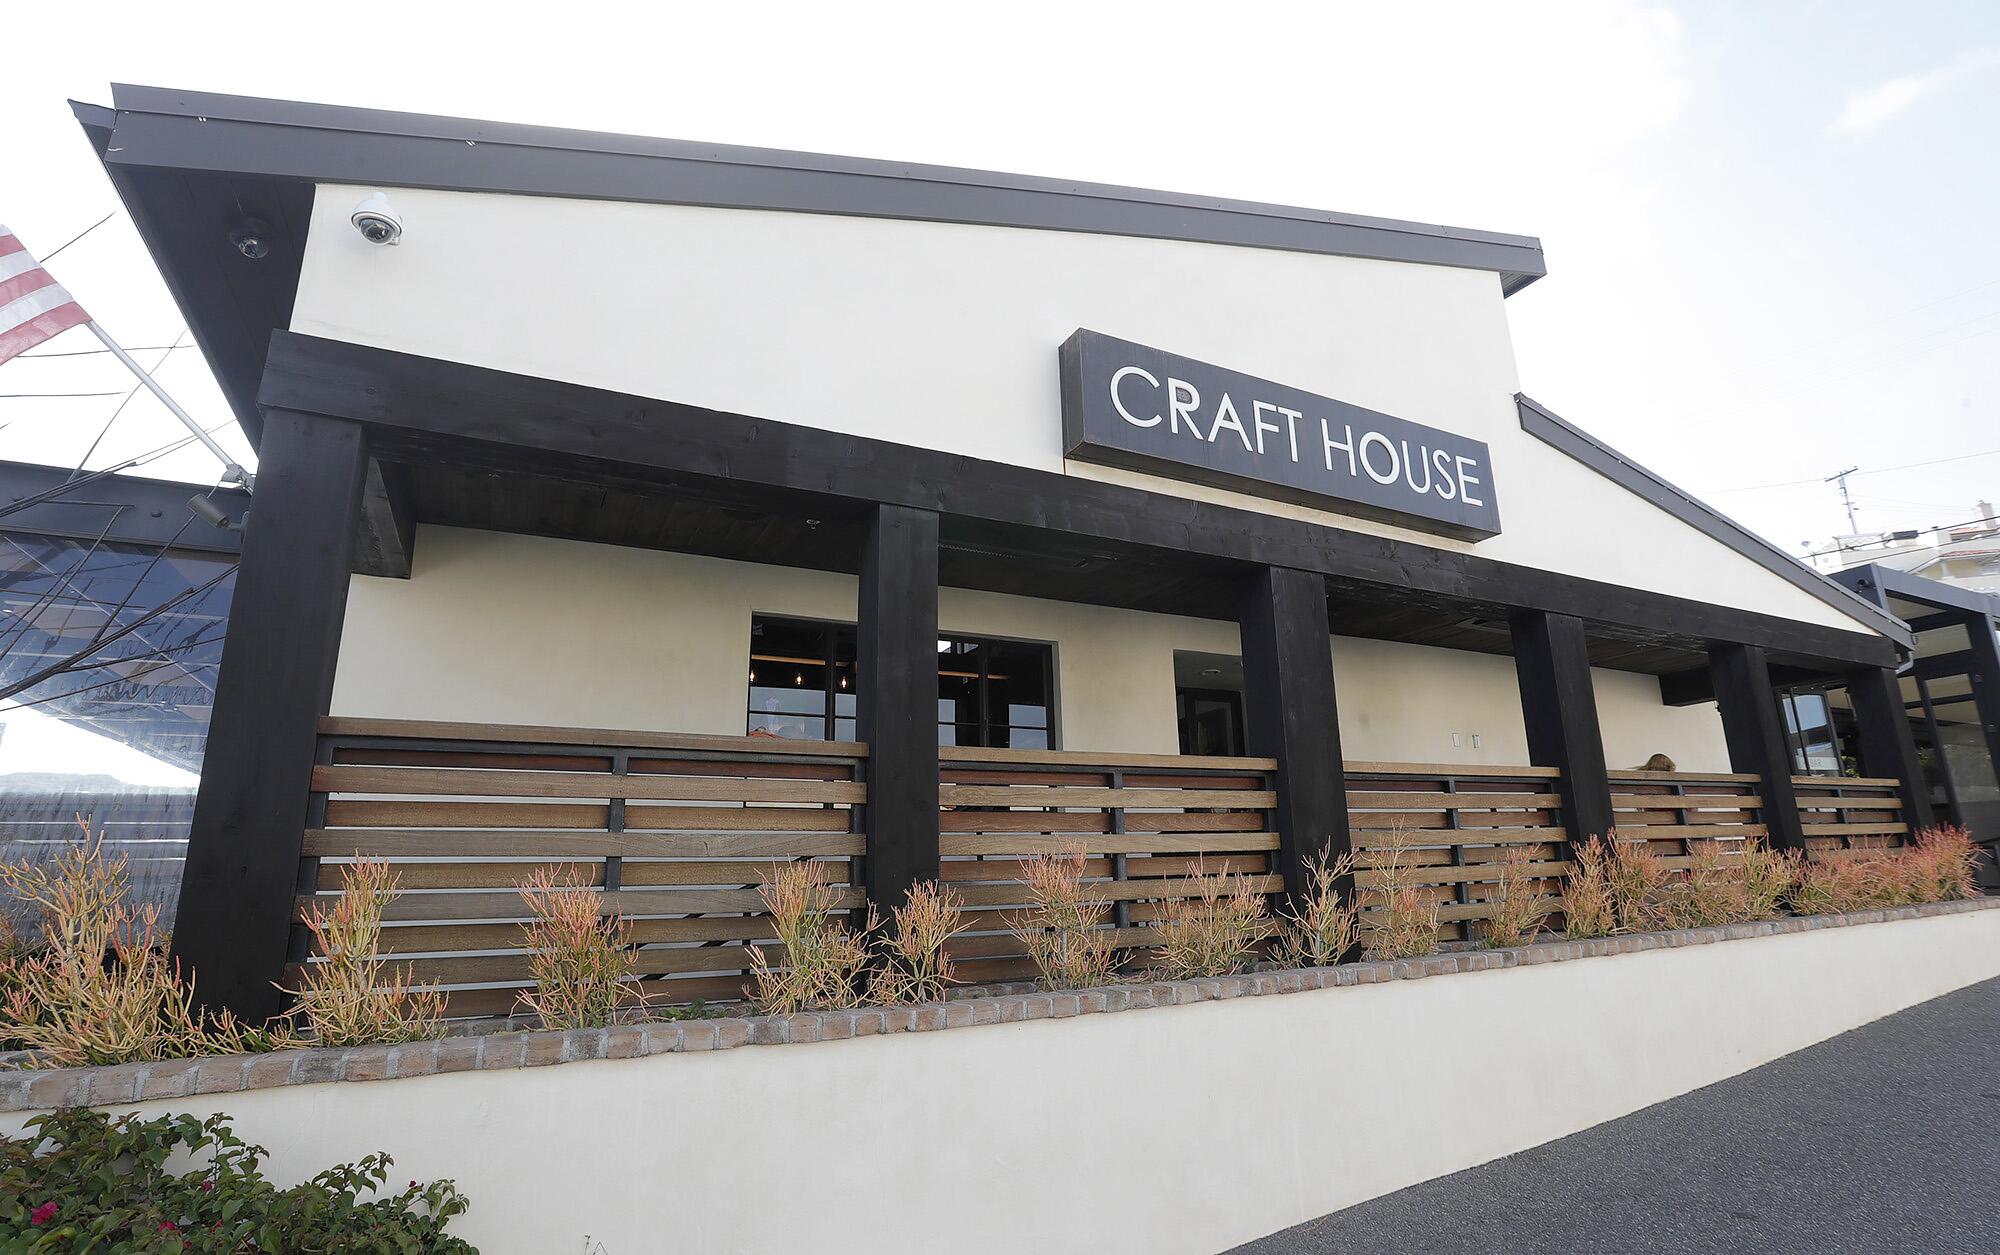 The Craft House in Dana Point. The restaurant is one of the original parking lot patios that opened during the pandemic.